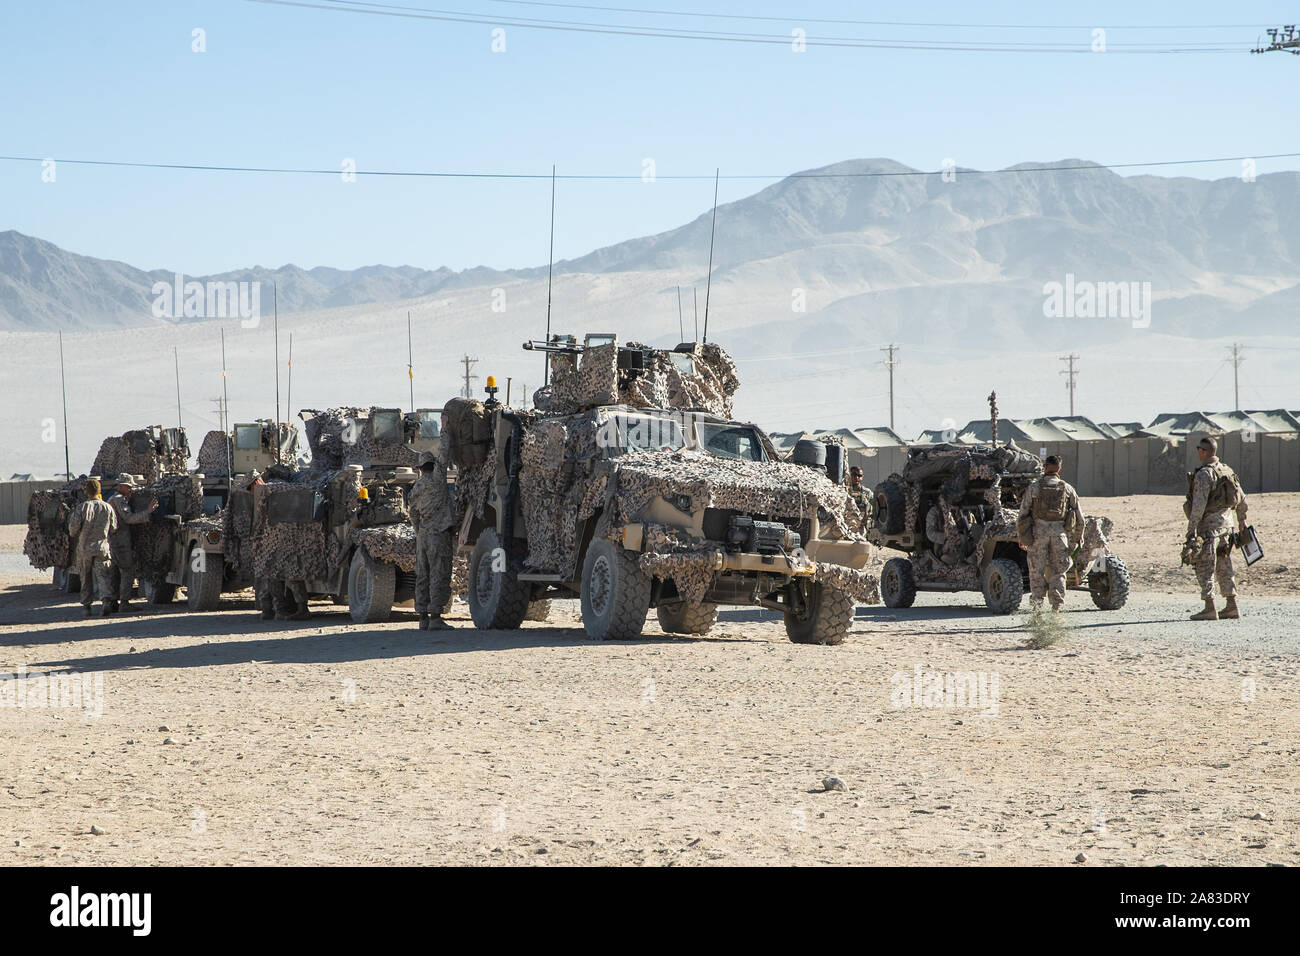 U.S. Marines with 1st Battalion, 6th Marine Regiment, 2nd Marine Division (2d MARDIV) prepare to depart for the field from Camp Wilson, Marine Corps Air Ground Combat Center, Twentynine Palms California, Nov. 3, 2019. Marines with 6th Marines are providing ground support during MAGTF Warfighting Exercise 1-20, the largest exercise conducted by the 2d MARDIV in decades. (U.S. Marine Corps photo by Lance Cpl. Reine Whitaker) Stock Photo